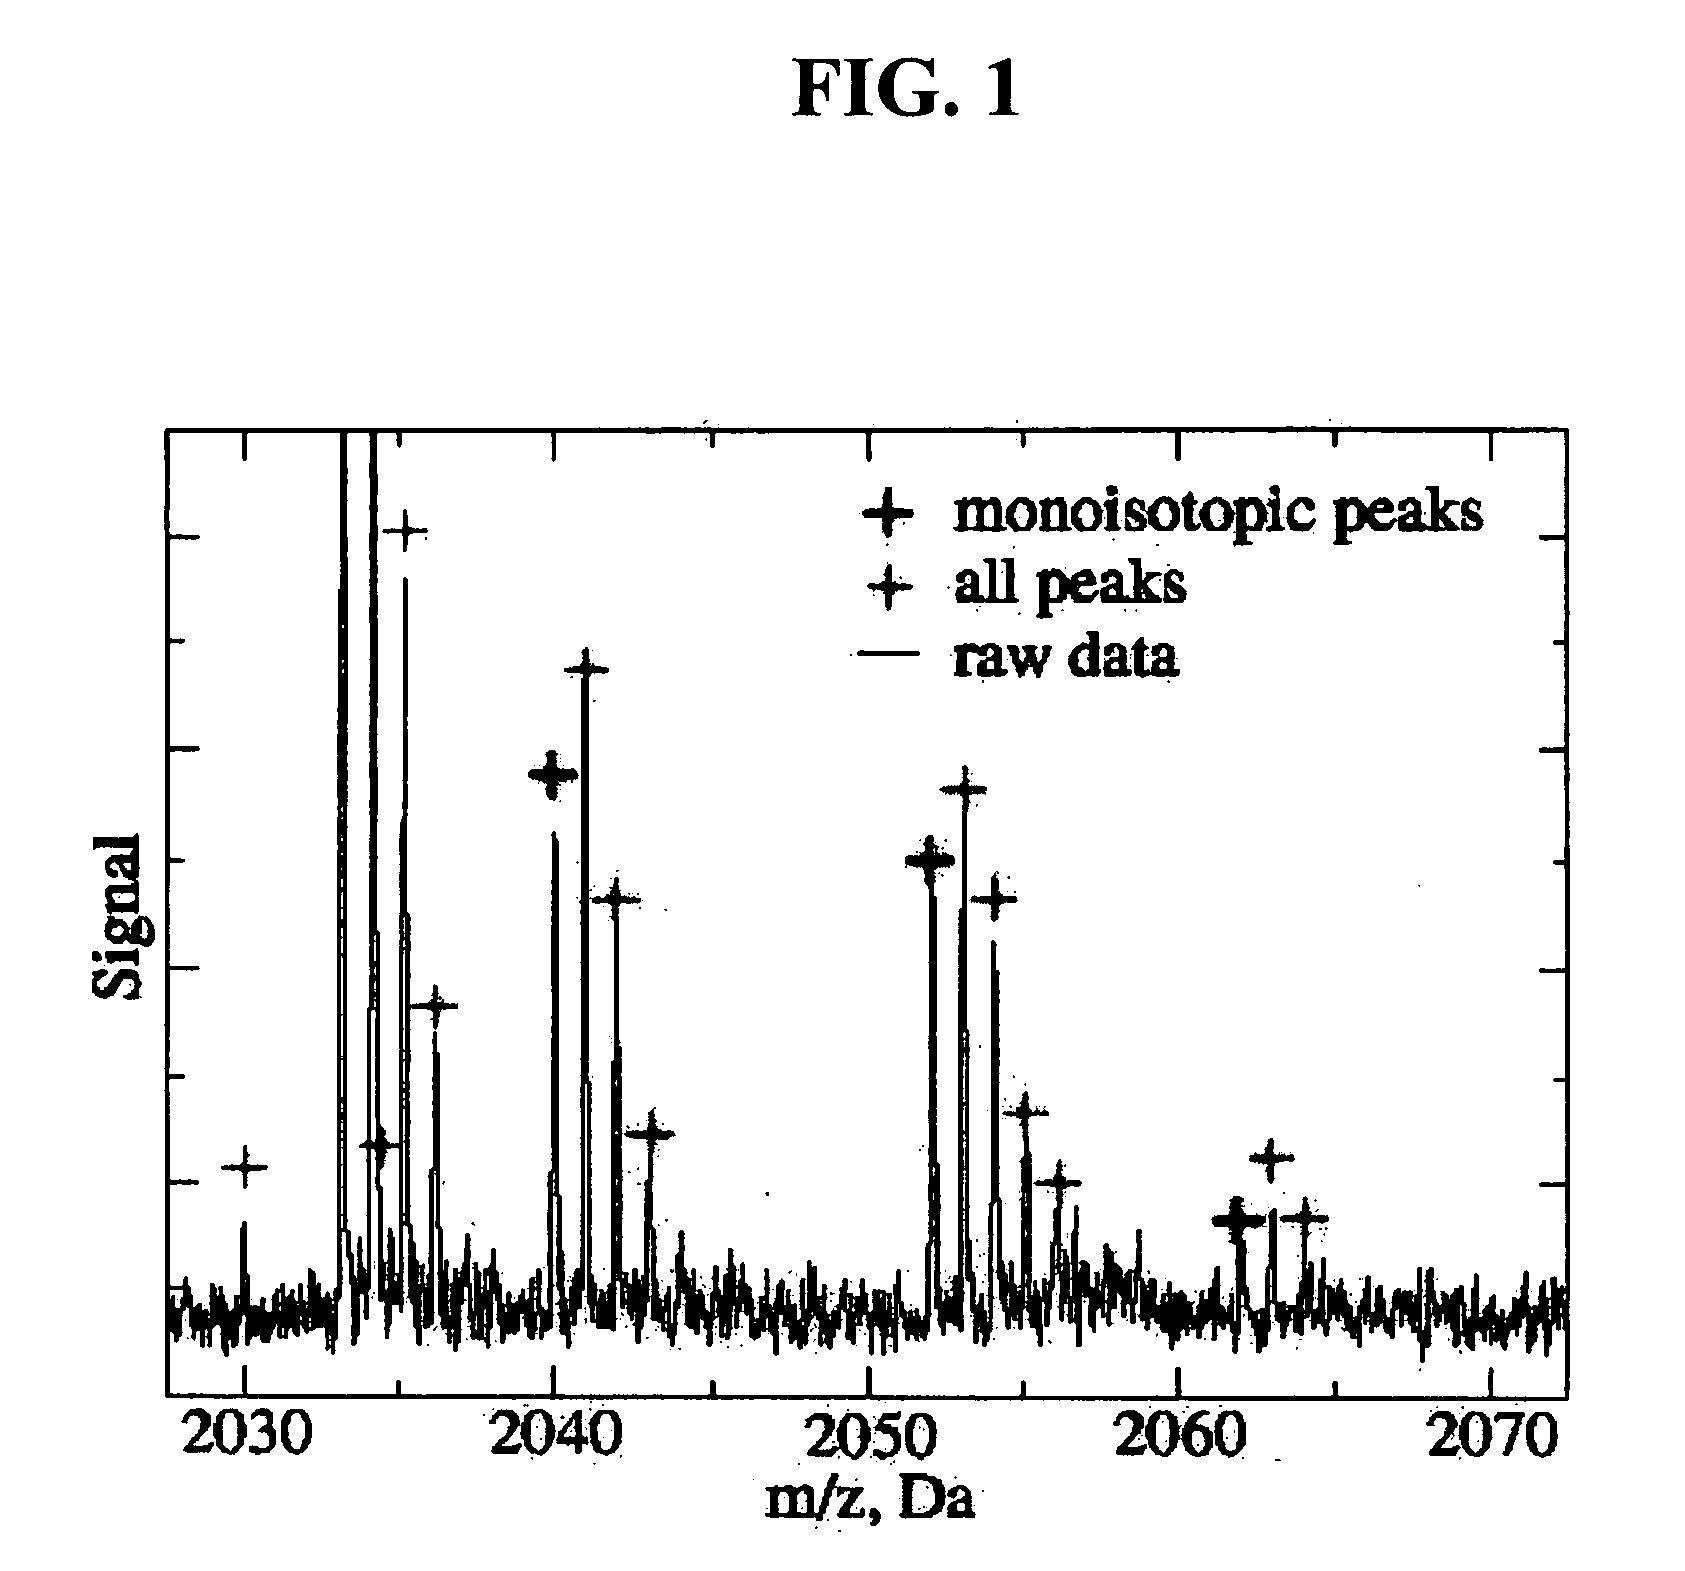 Method to automatically identify peak and monoisotopic peaks in mass spectral data for biomolecular applications